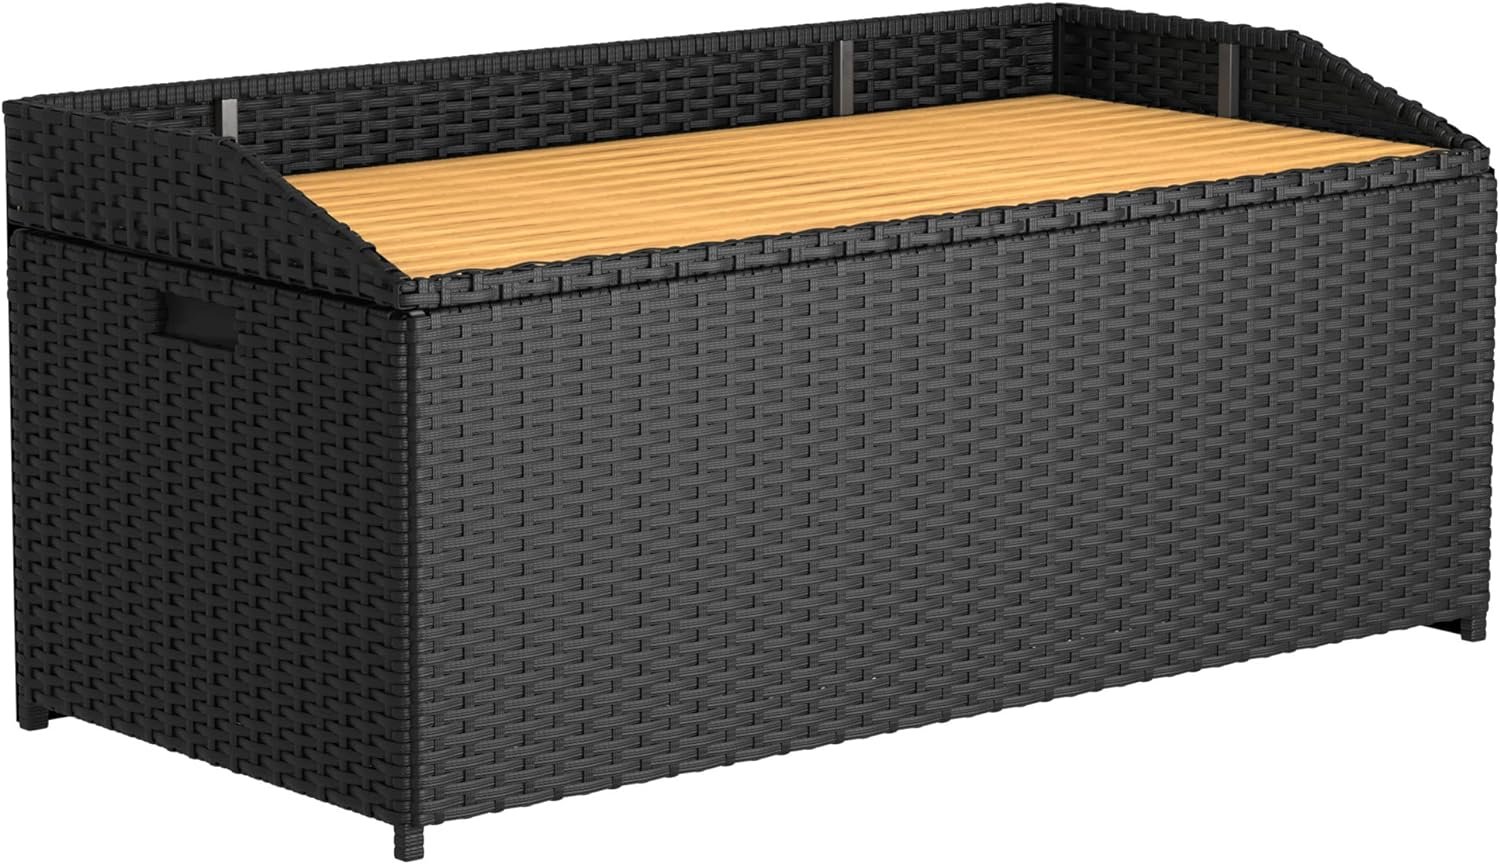 Greesum 65 Gallon Rattan Wicker Deck Box Large Outdoor Storage with Wood Bench Surface and Dust Bag for Patio Furniture, Garden Tools, Pool Supplies, Weatherproof and UV Resistant, Black